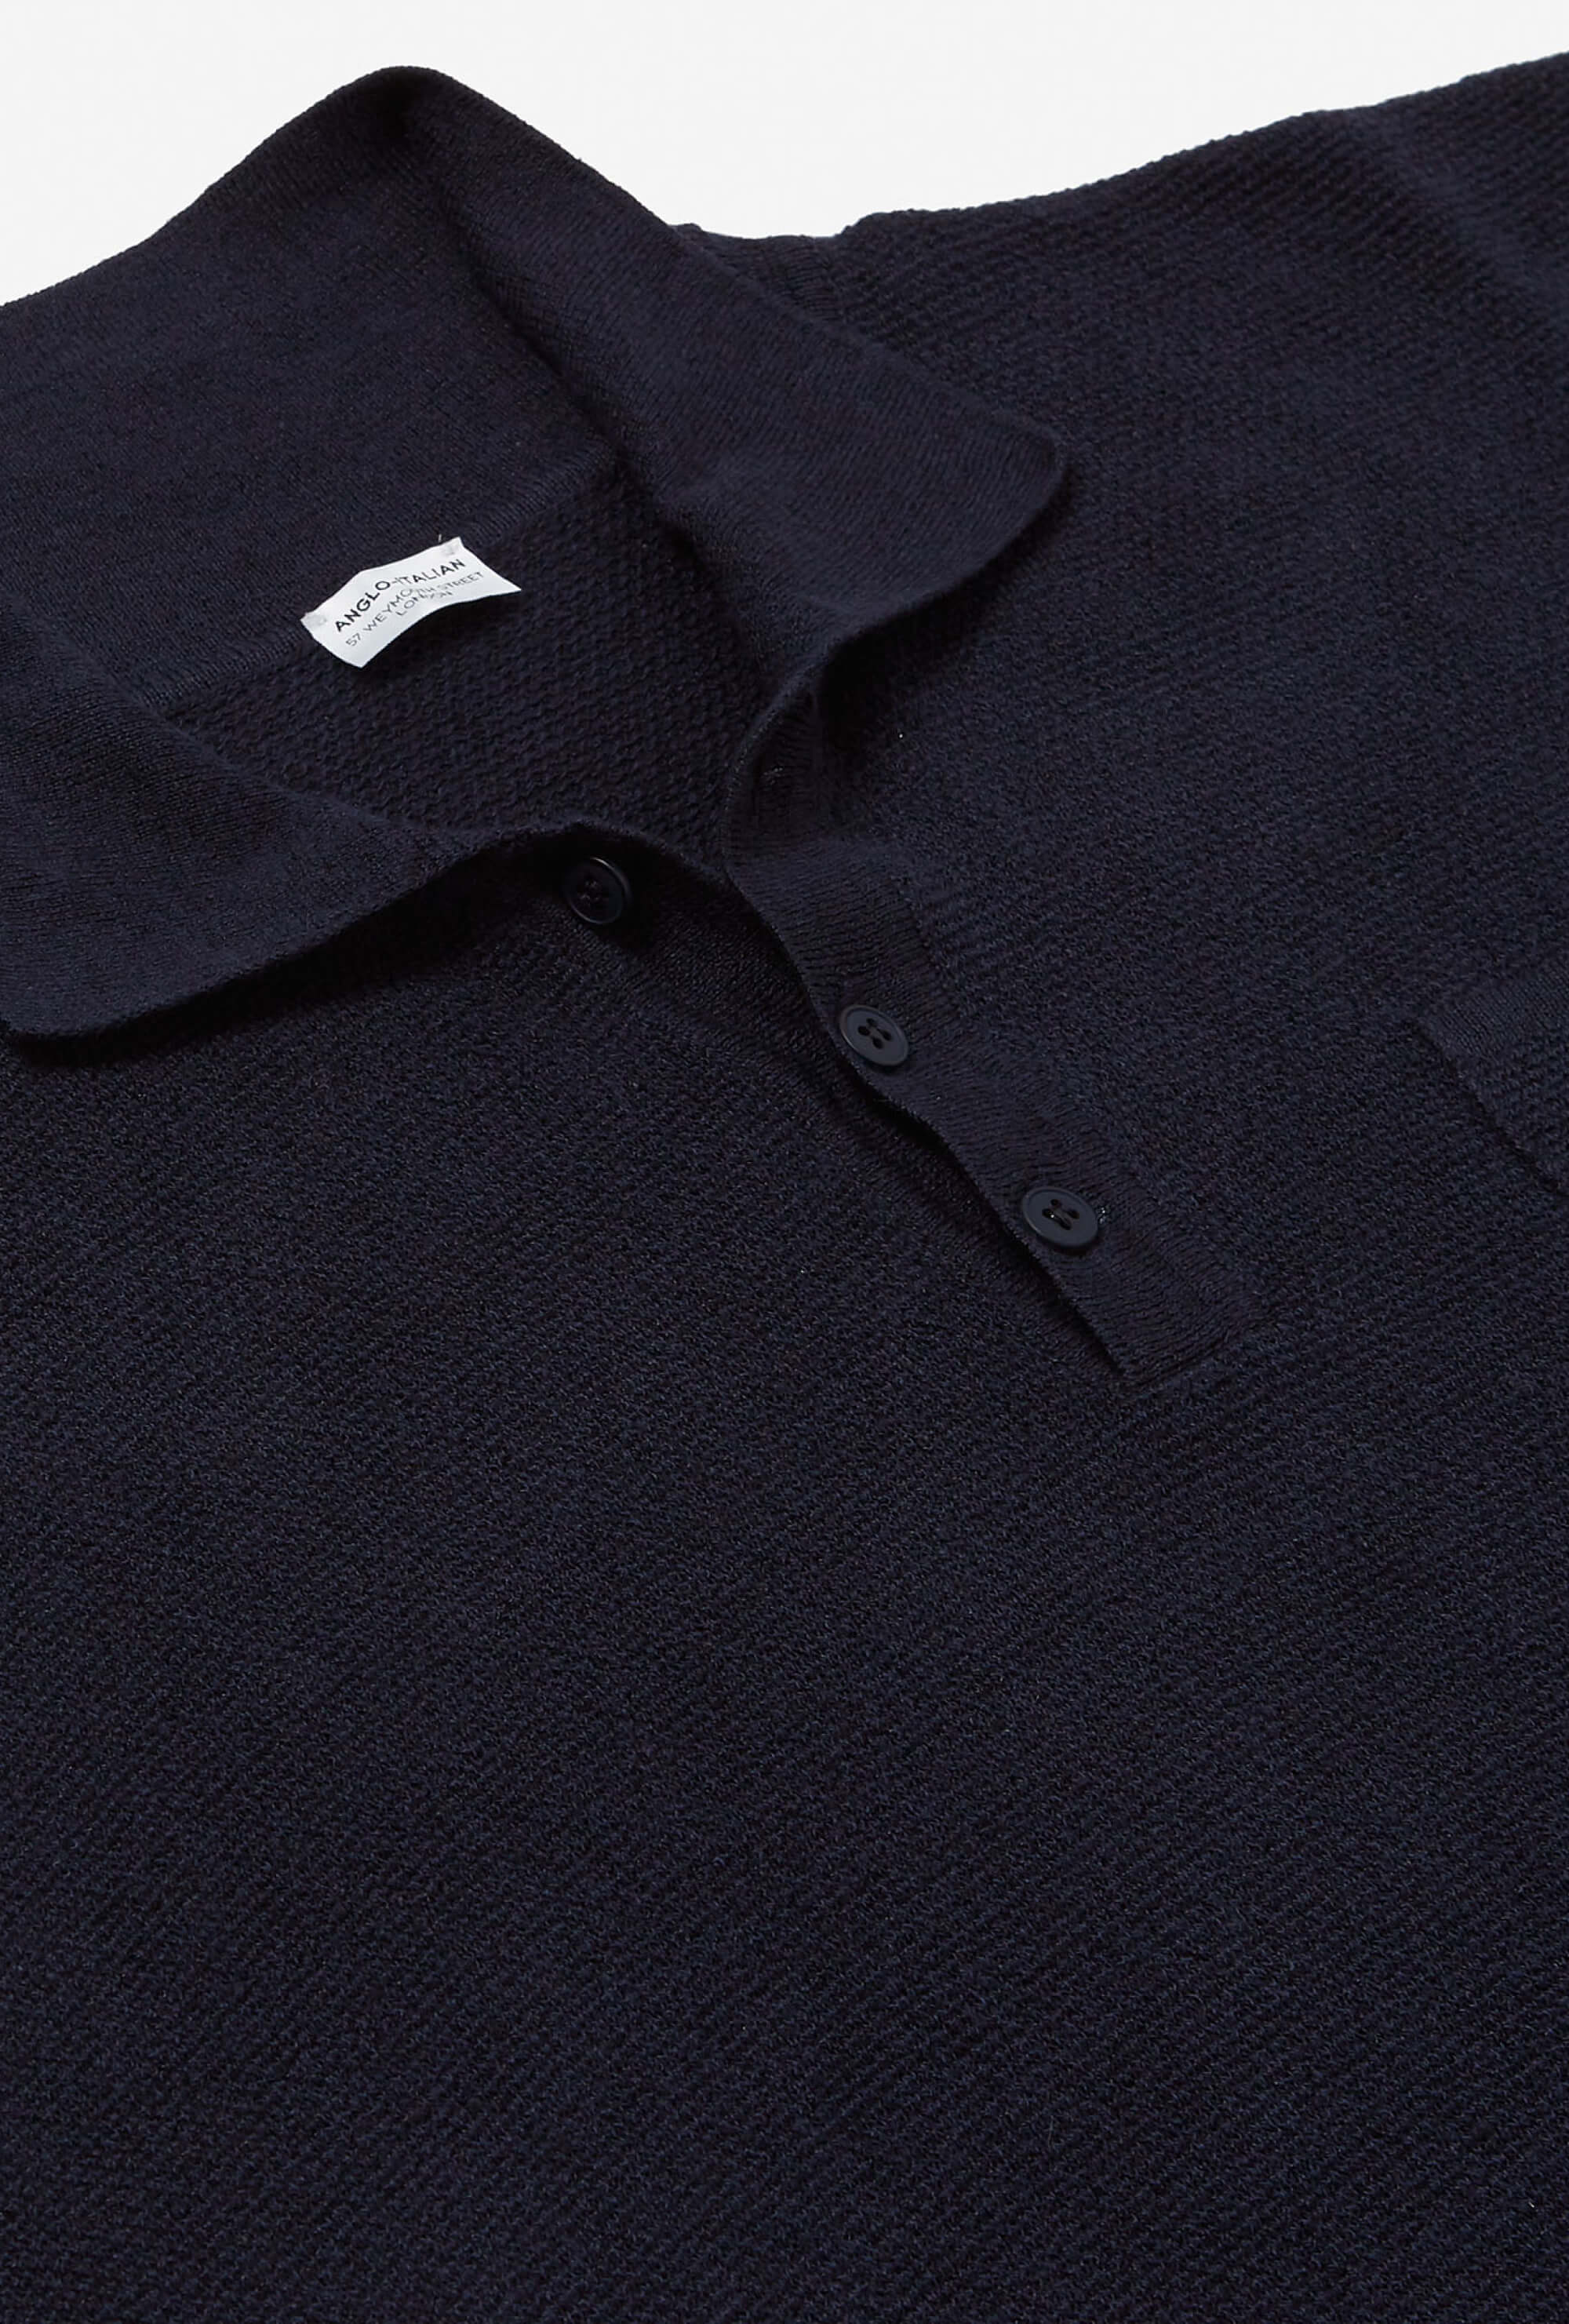 Knitted Polo Cotton Linen Navy